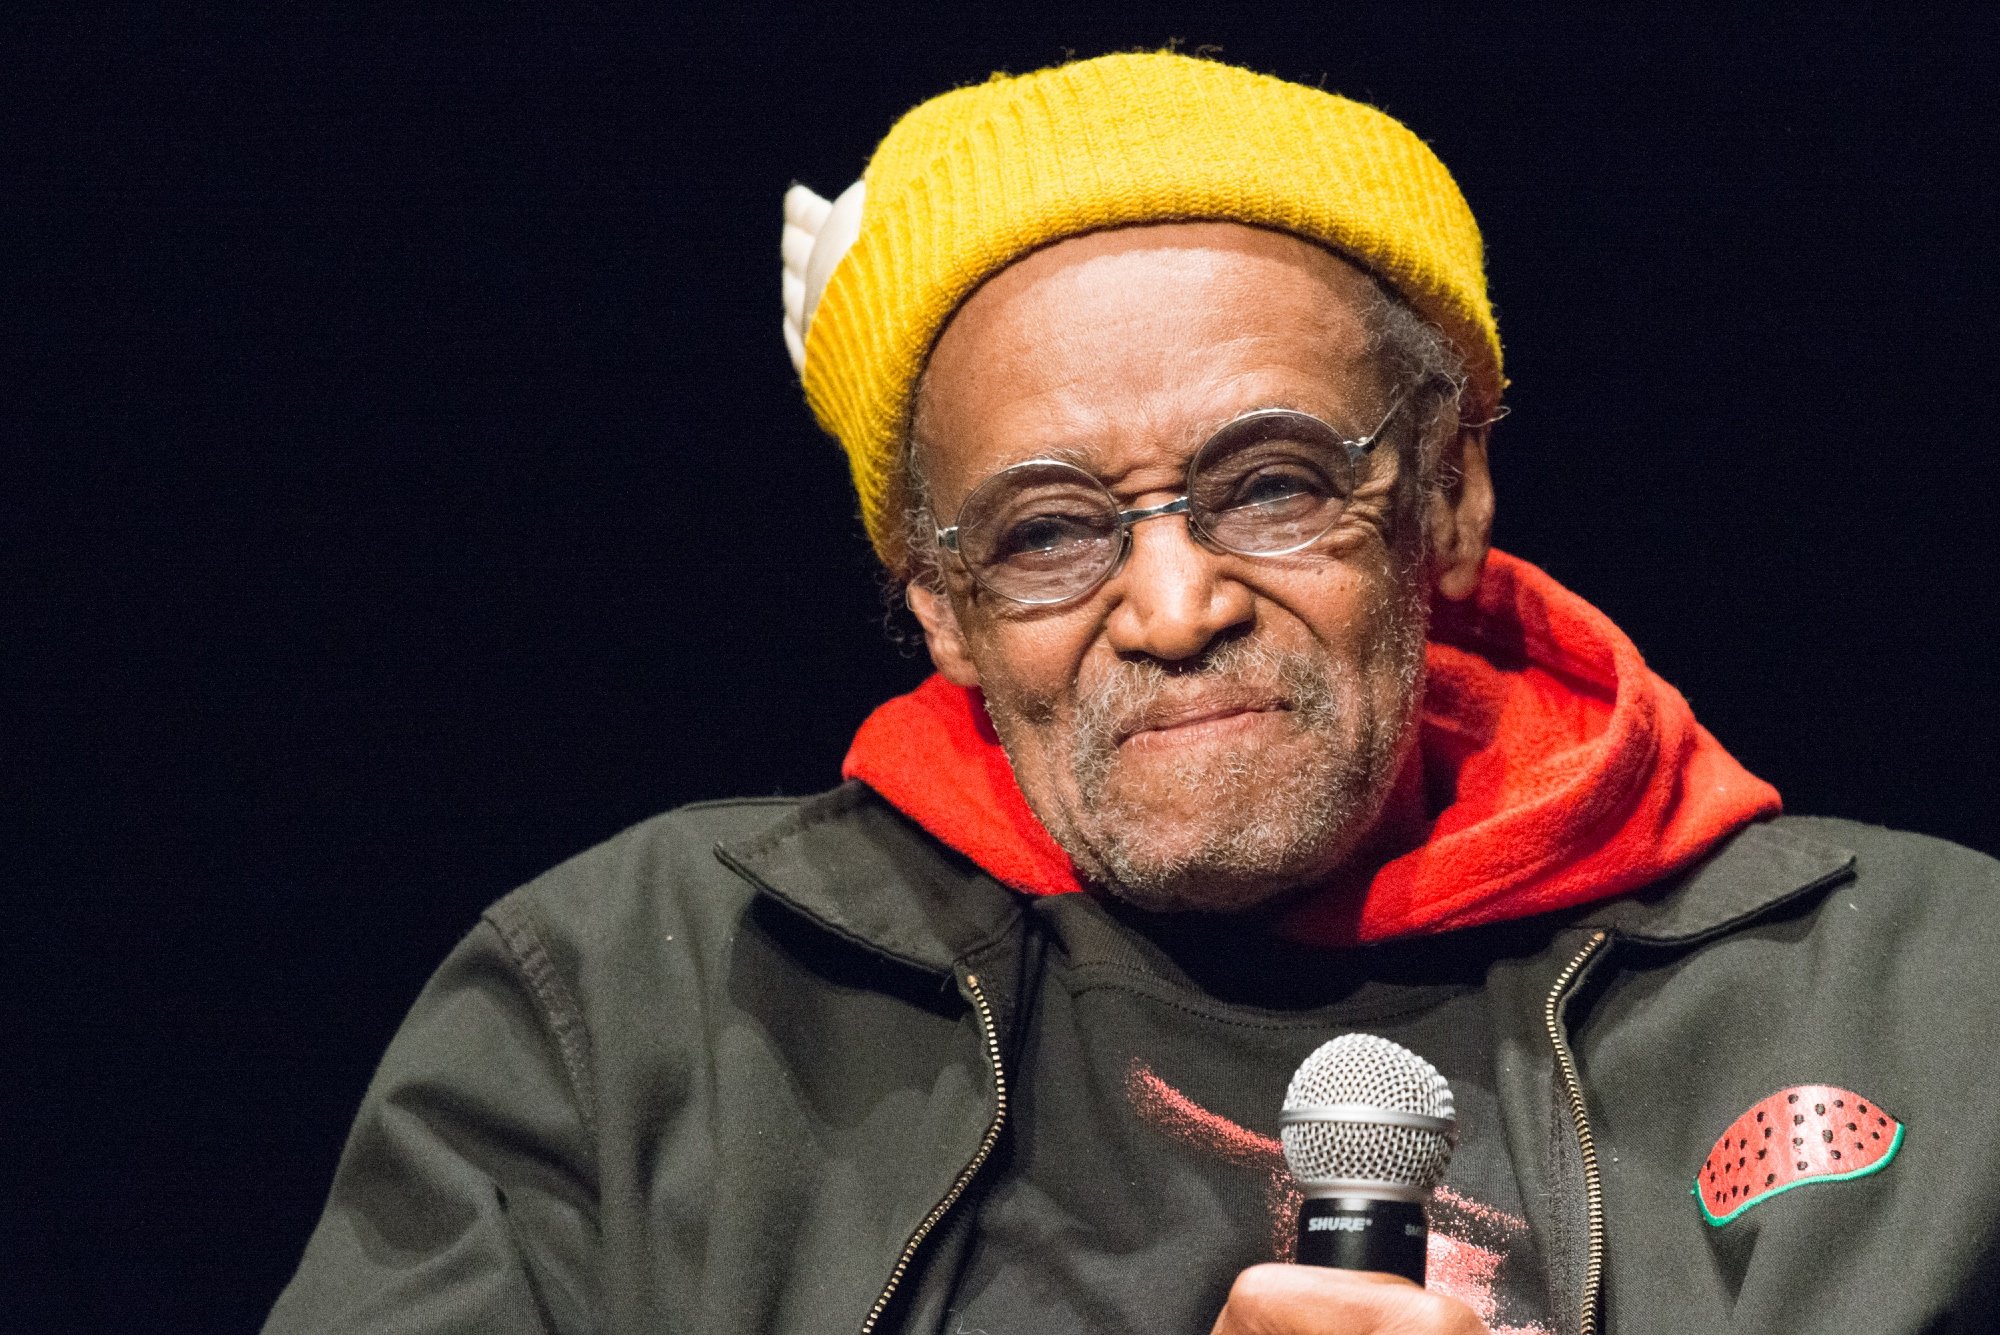 Melvin Van Peebles speaks during the 6th Annual Queens World Film Festival wearing a yellow beanie